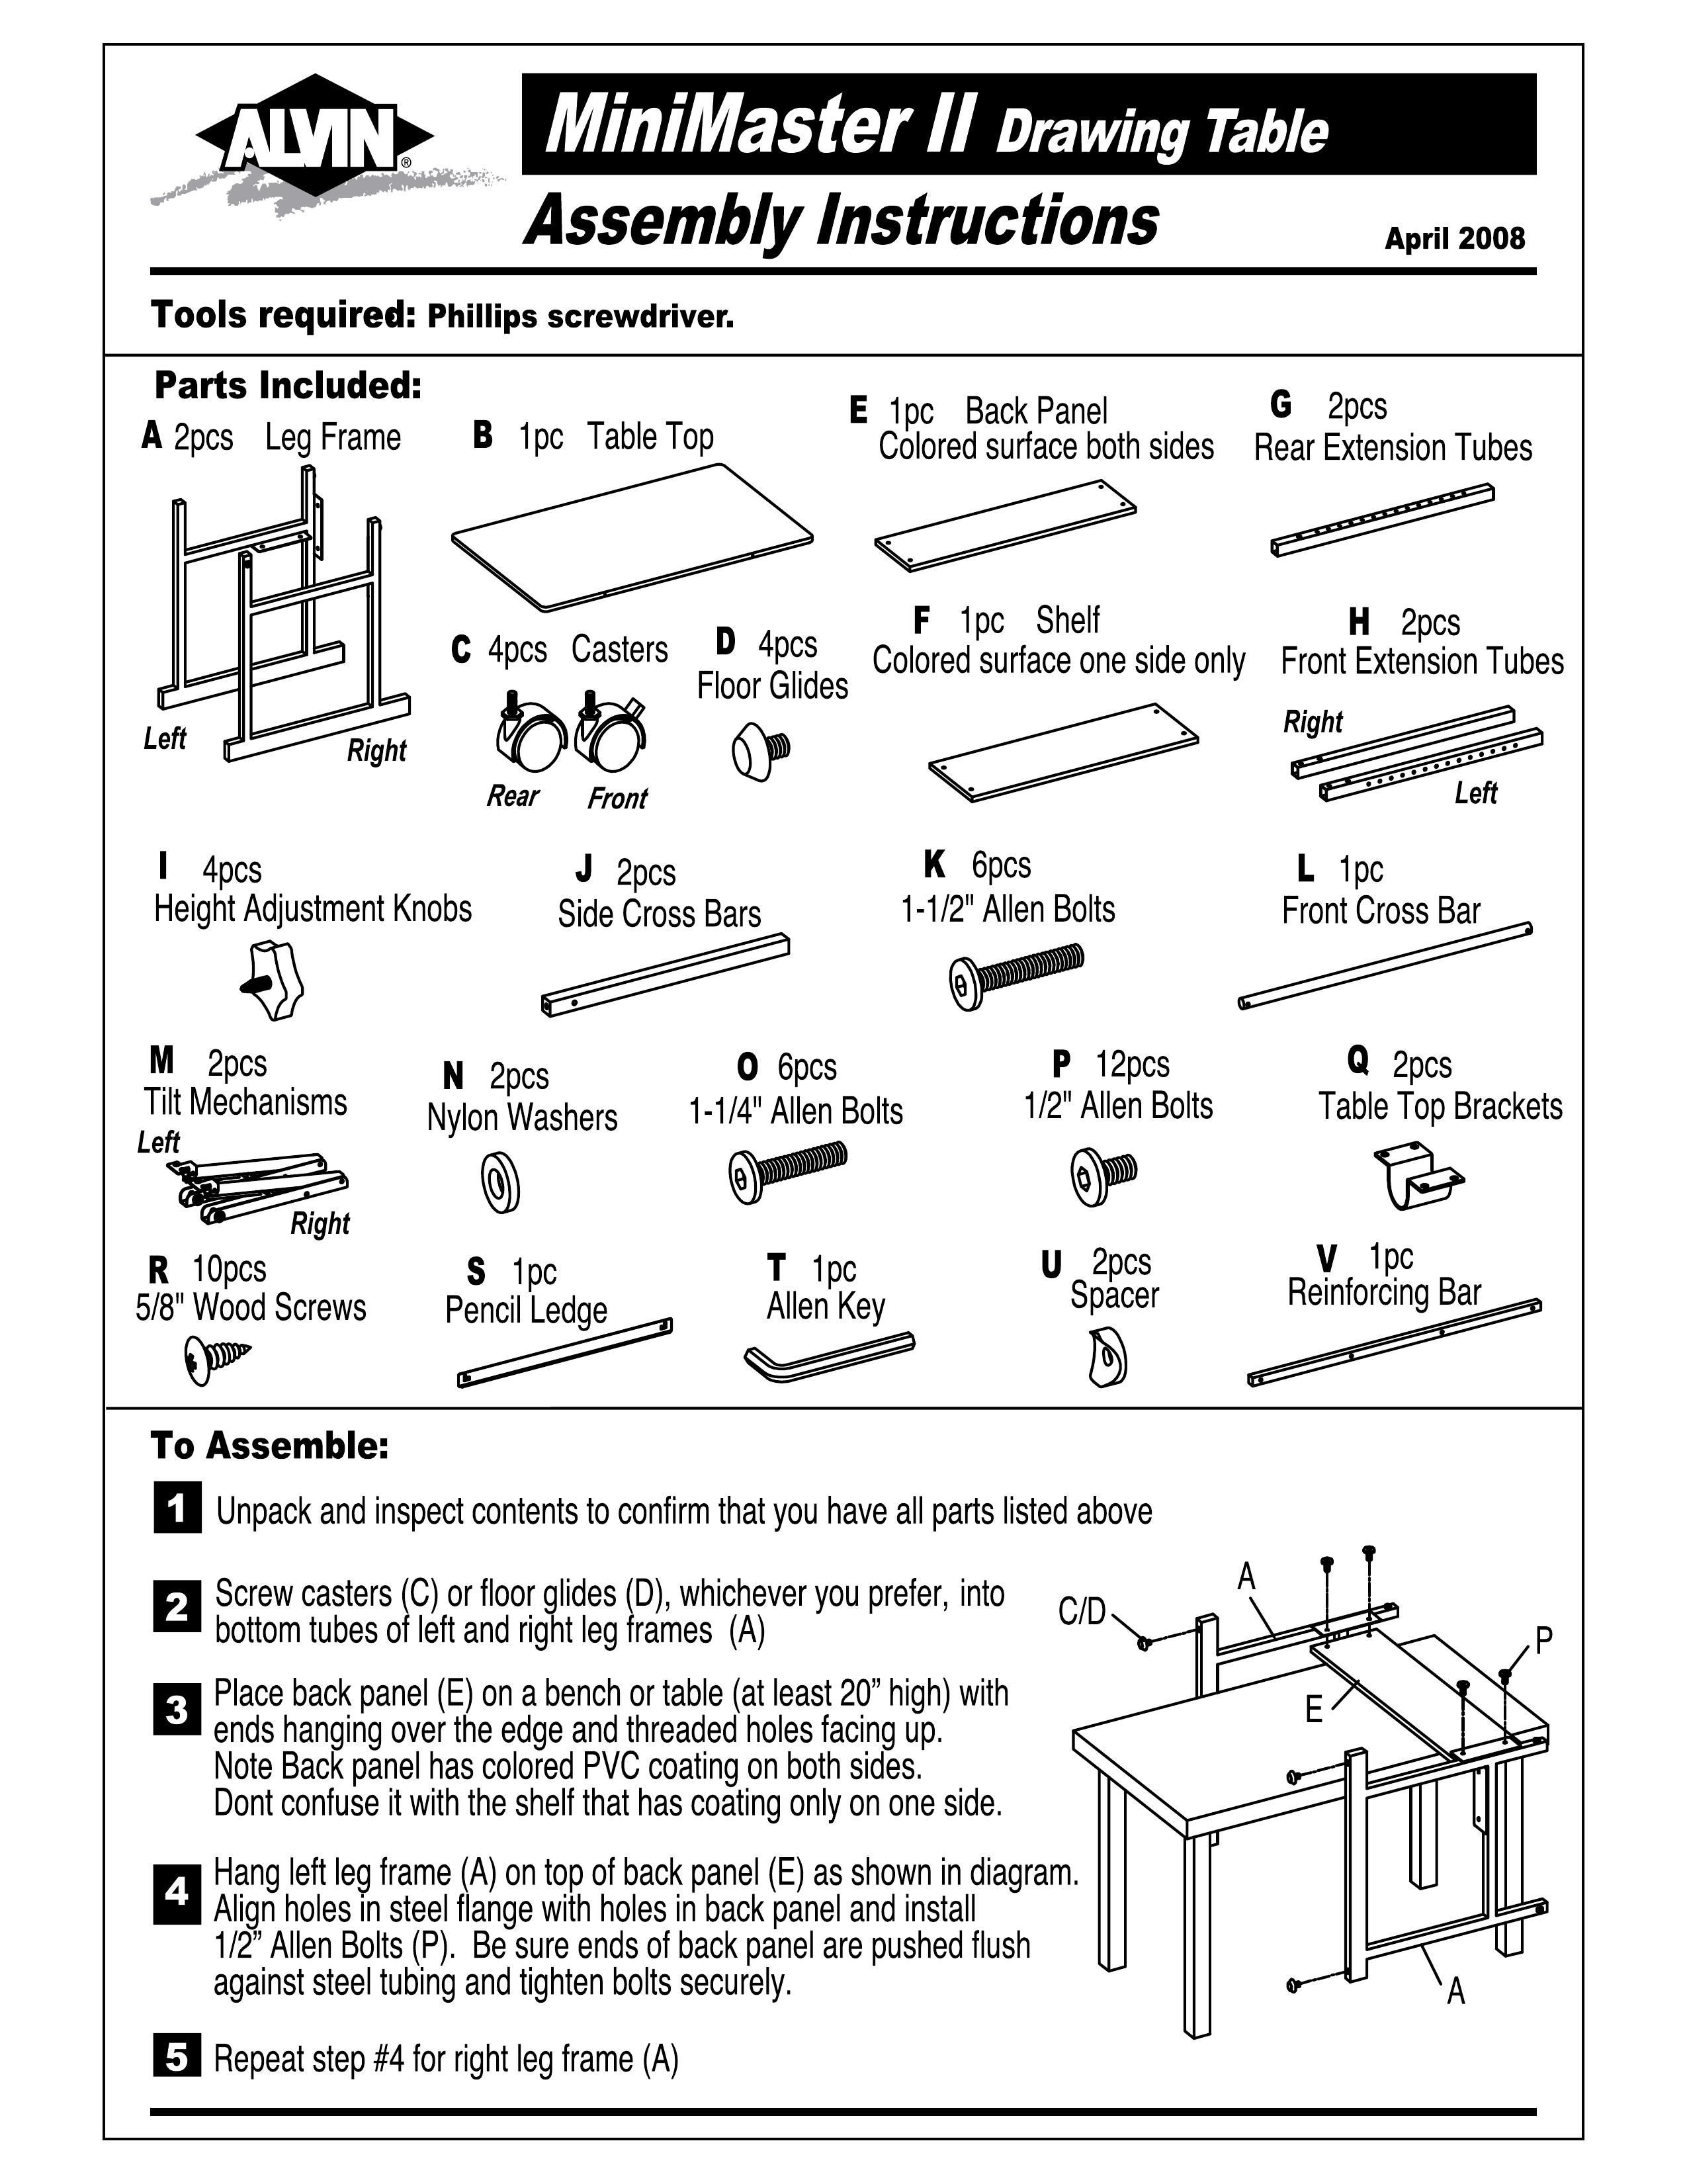 Alvin Drawing Table Picnic Table User Manual